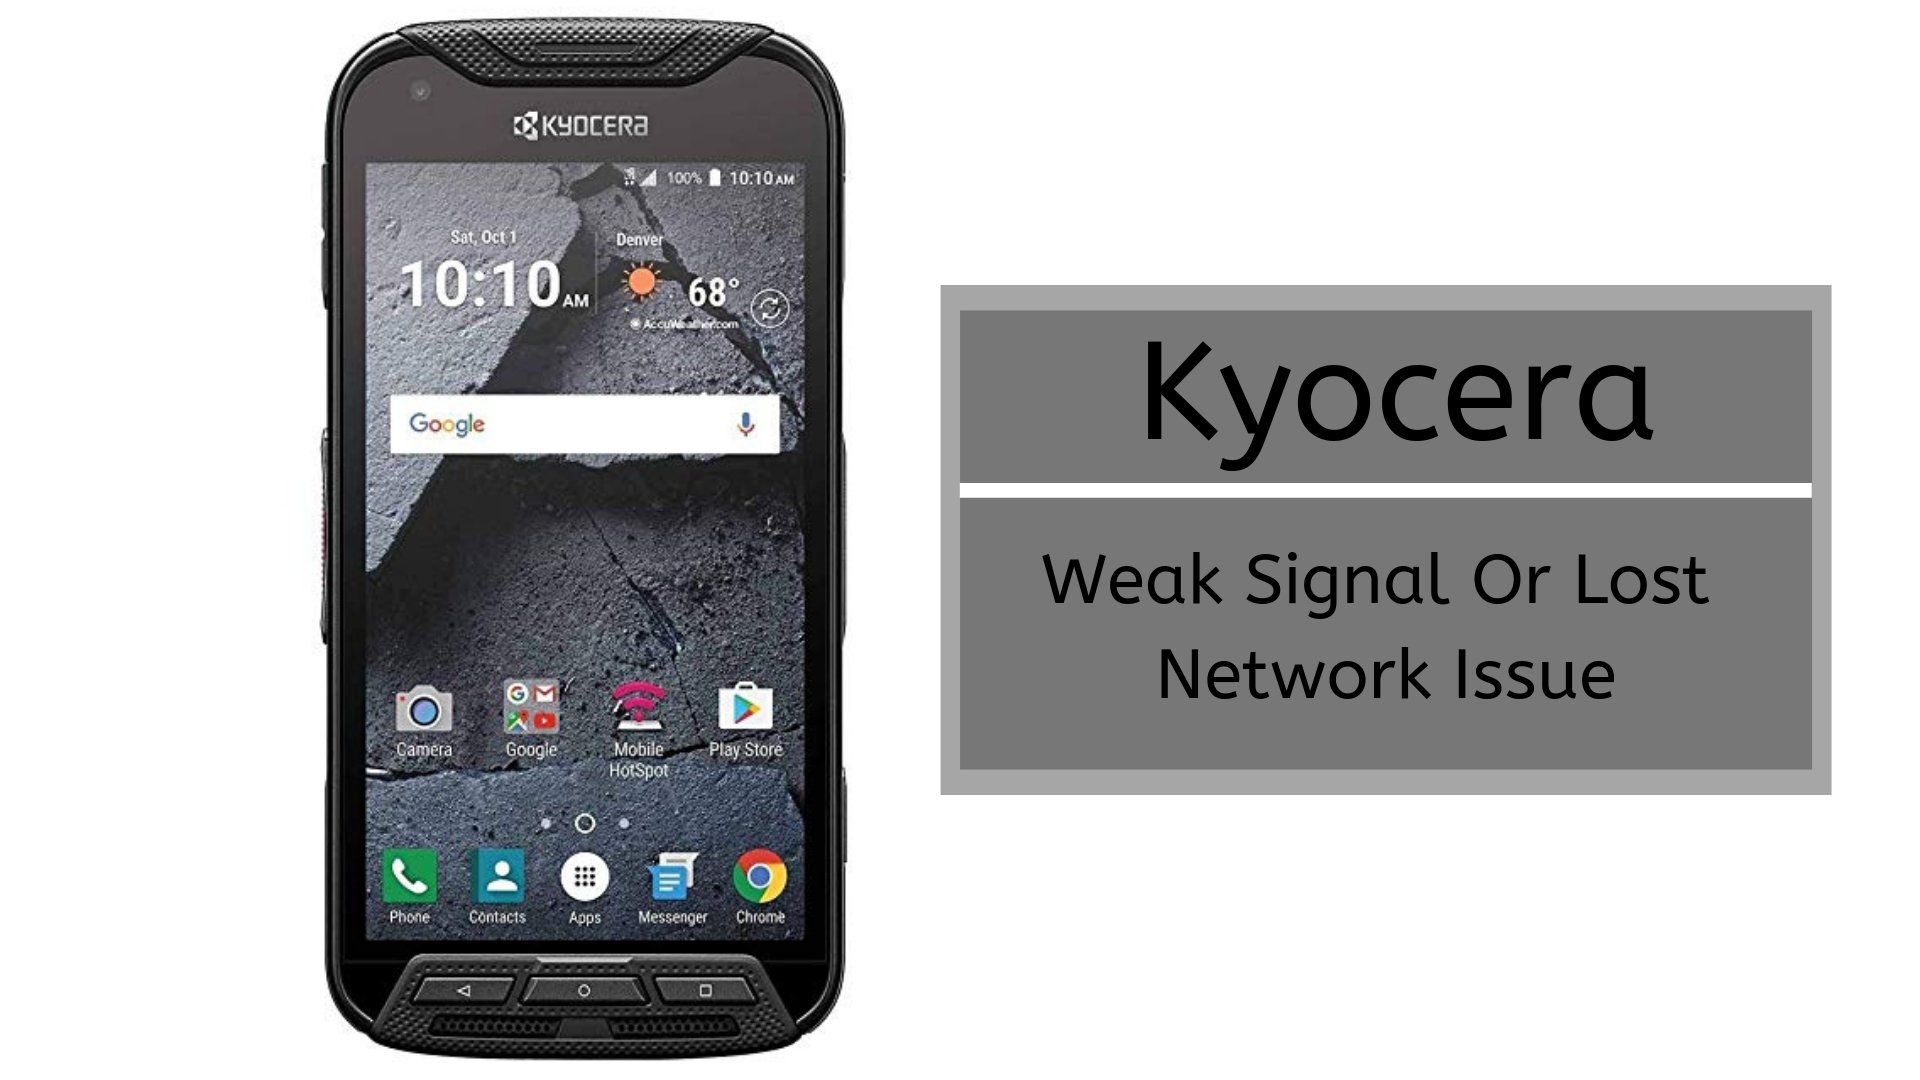 Guide to Fix Kyocera Weak Signal or Lost Network Issue